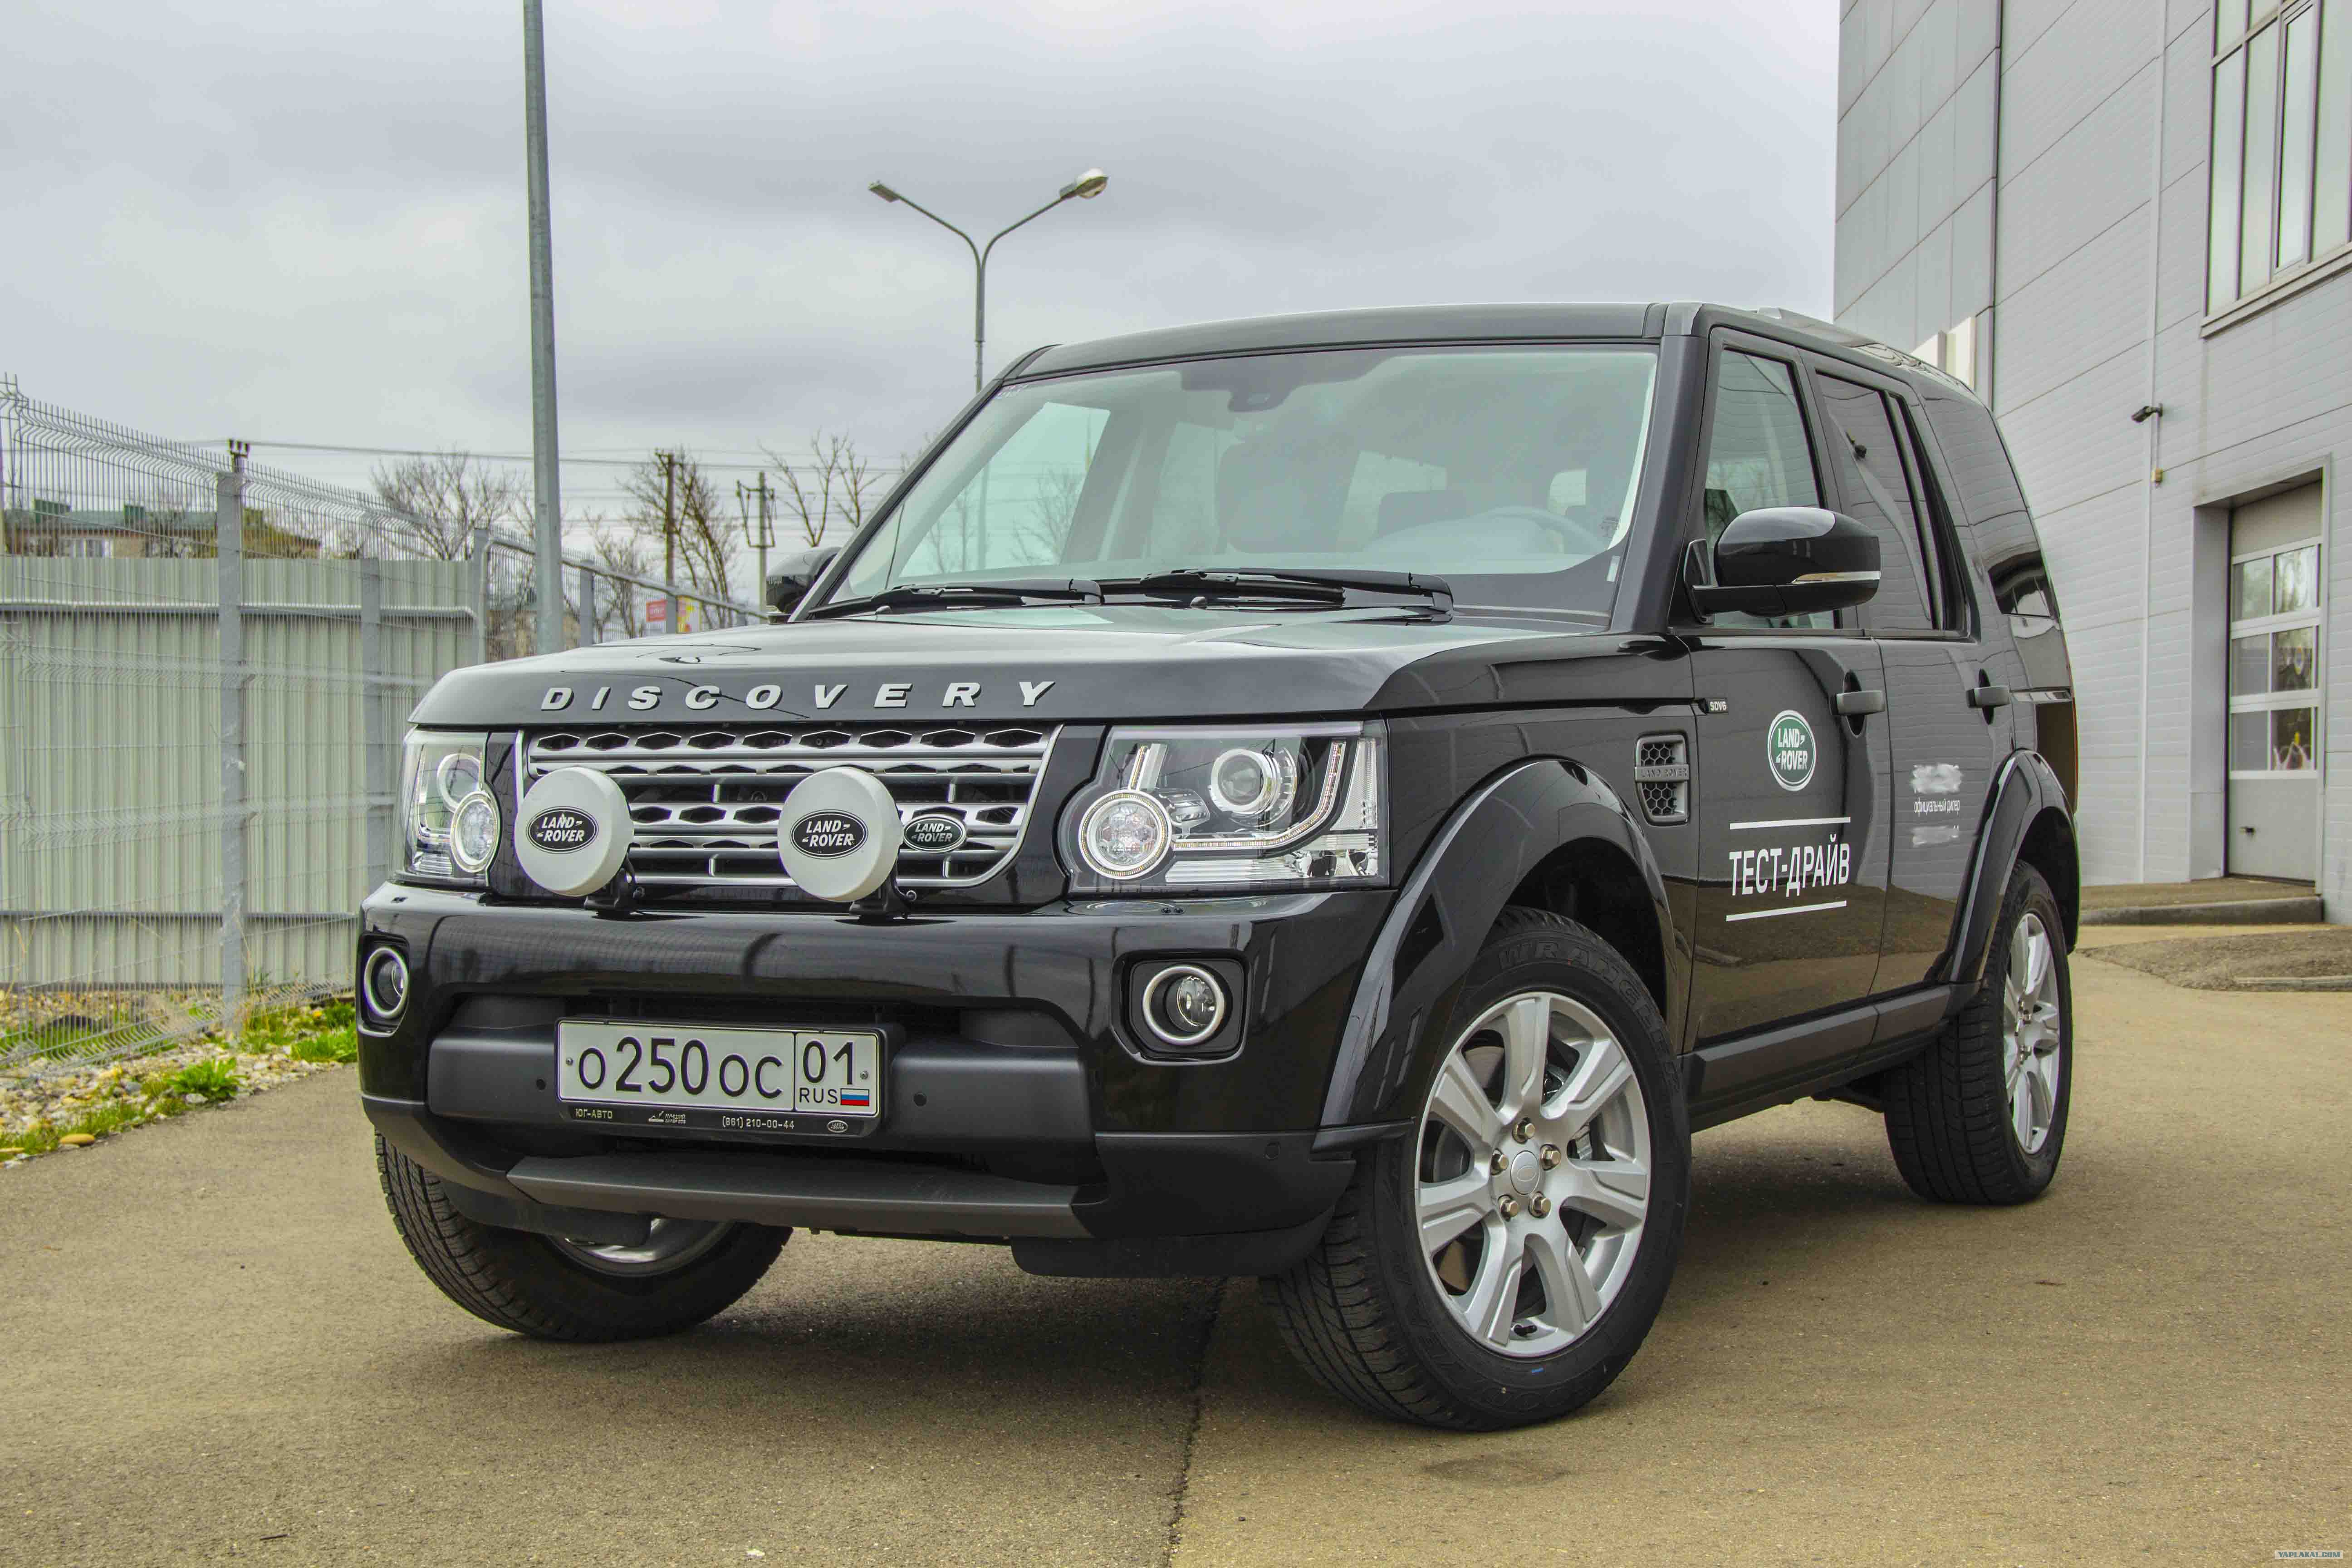 Дискавери 0. Land Rover Discovery 4. Land Rover Дискавери 4. Land Rover Discovery 4 2016. Land Rover Discovery 3.